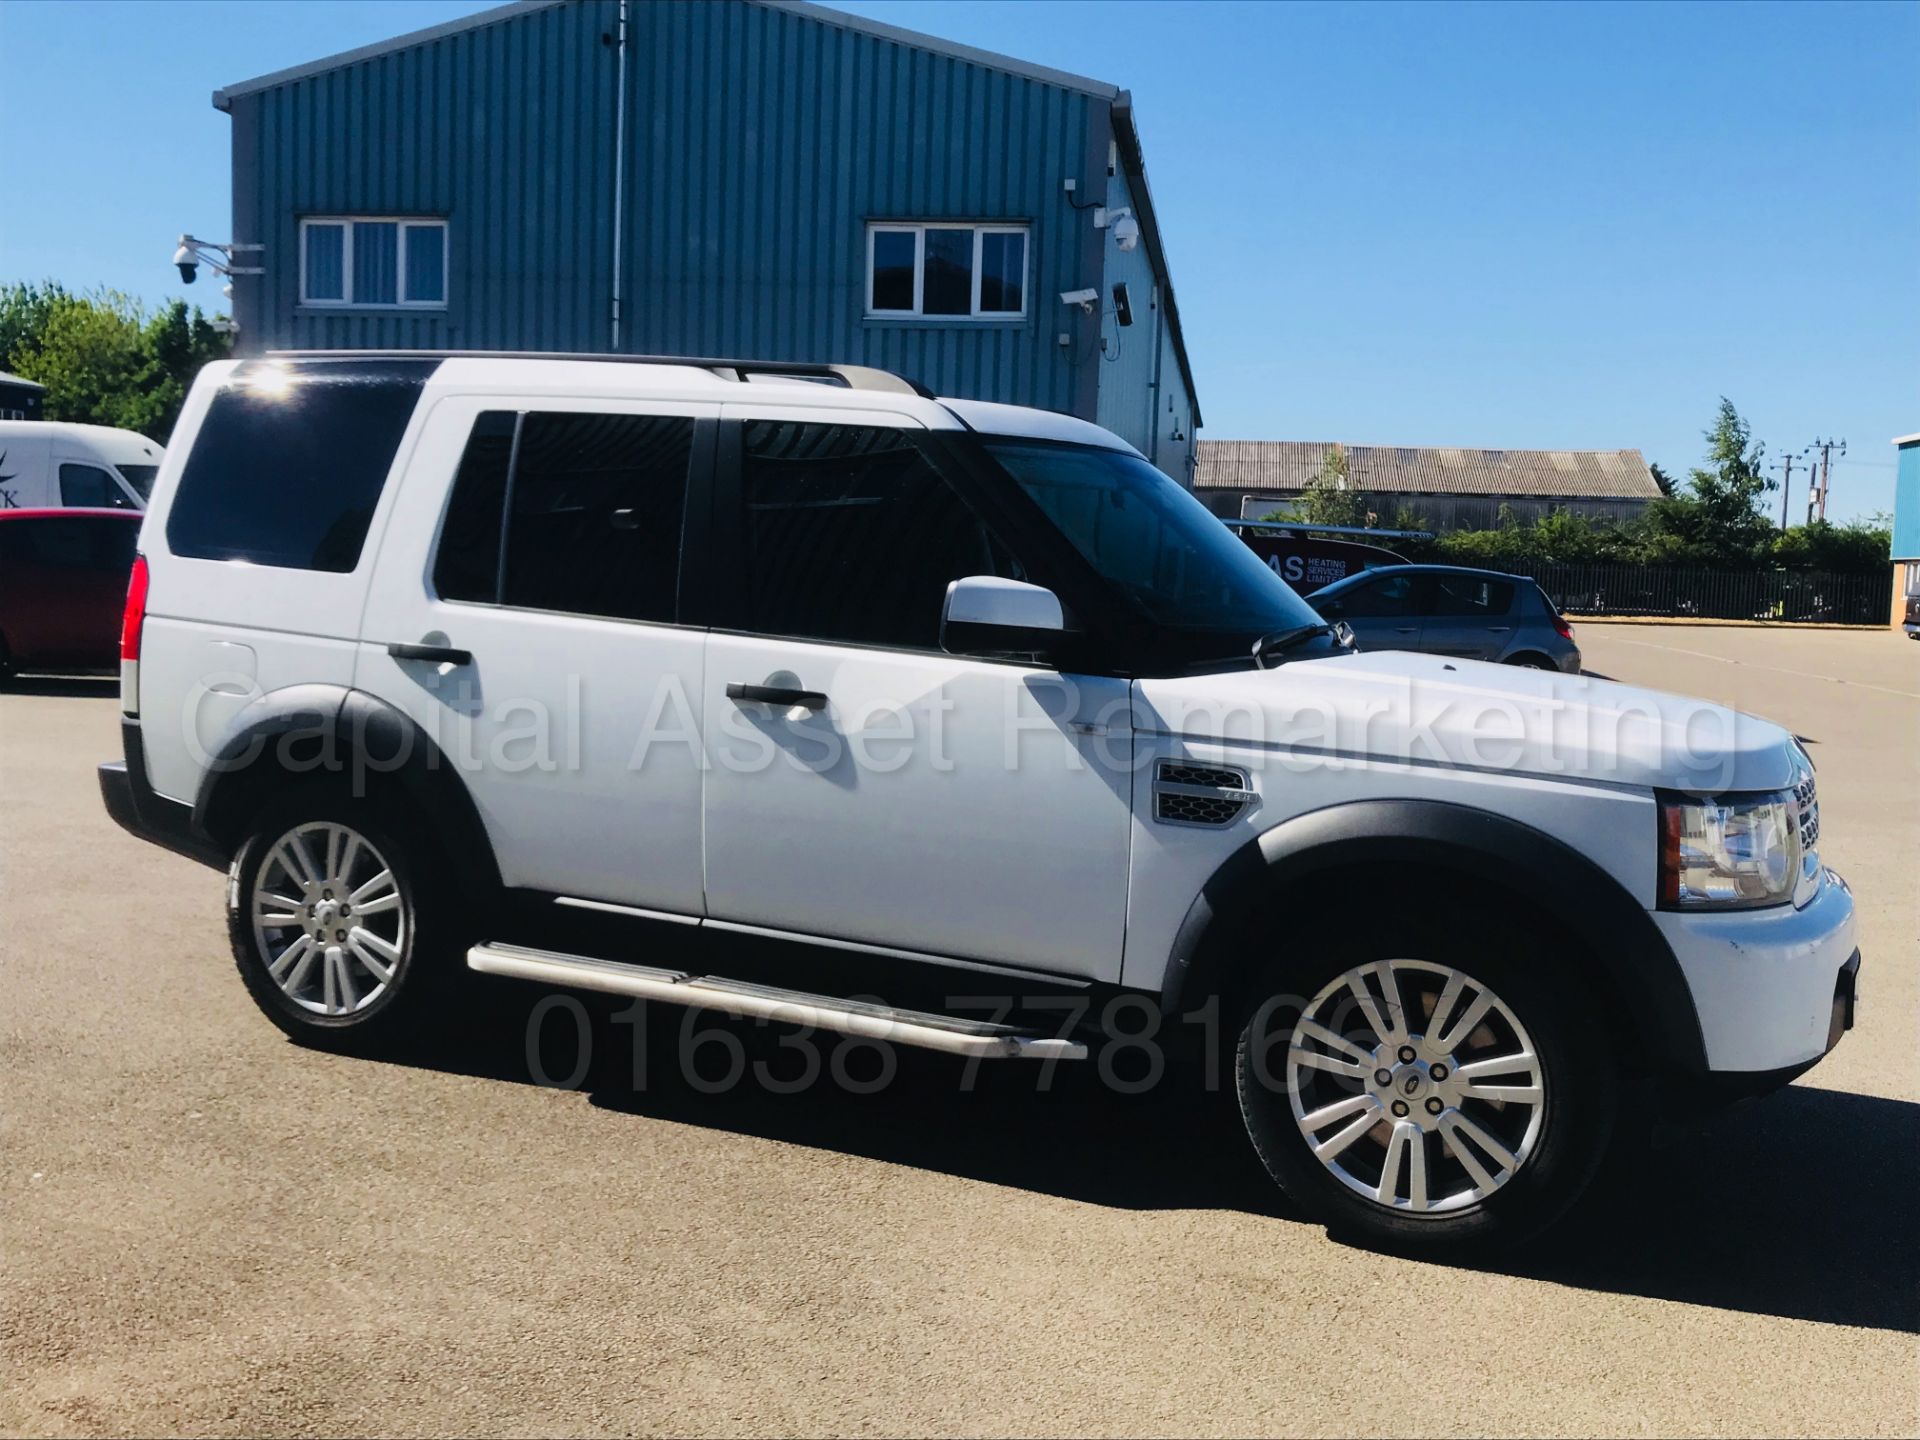 (On Sale) LAND ROVER DISCOVERY 4 **COMMERCIAL VAN**(2013 - 13 REG) '3.0 TDV6 - 210 BHP - AUTO' - Image 13 of 38